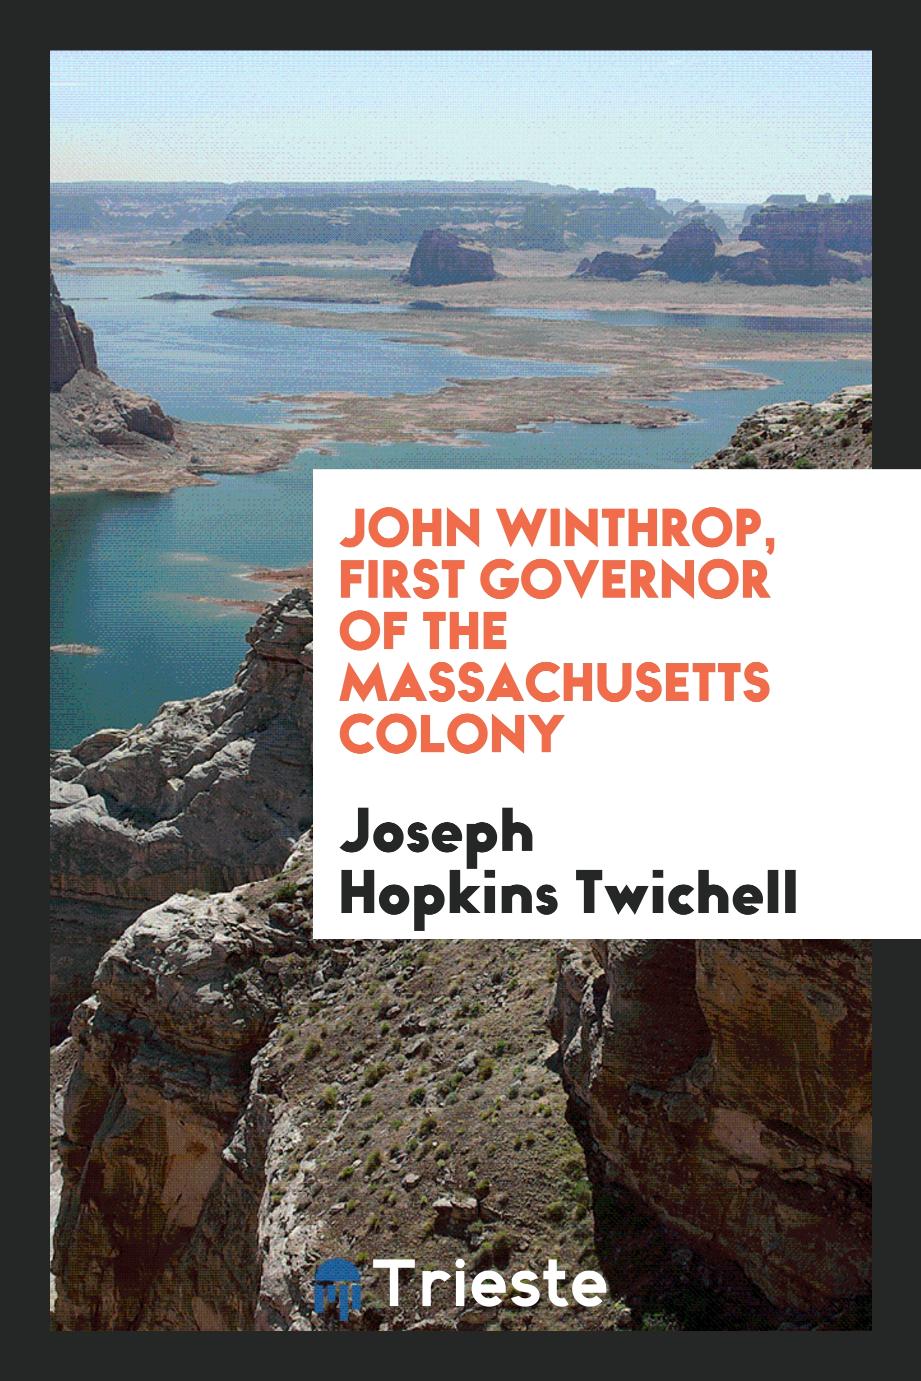 John Winthrop, first governor of the Massachusetts colony